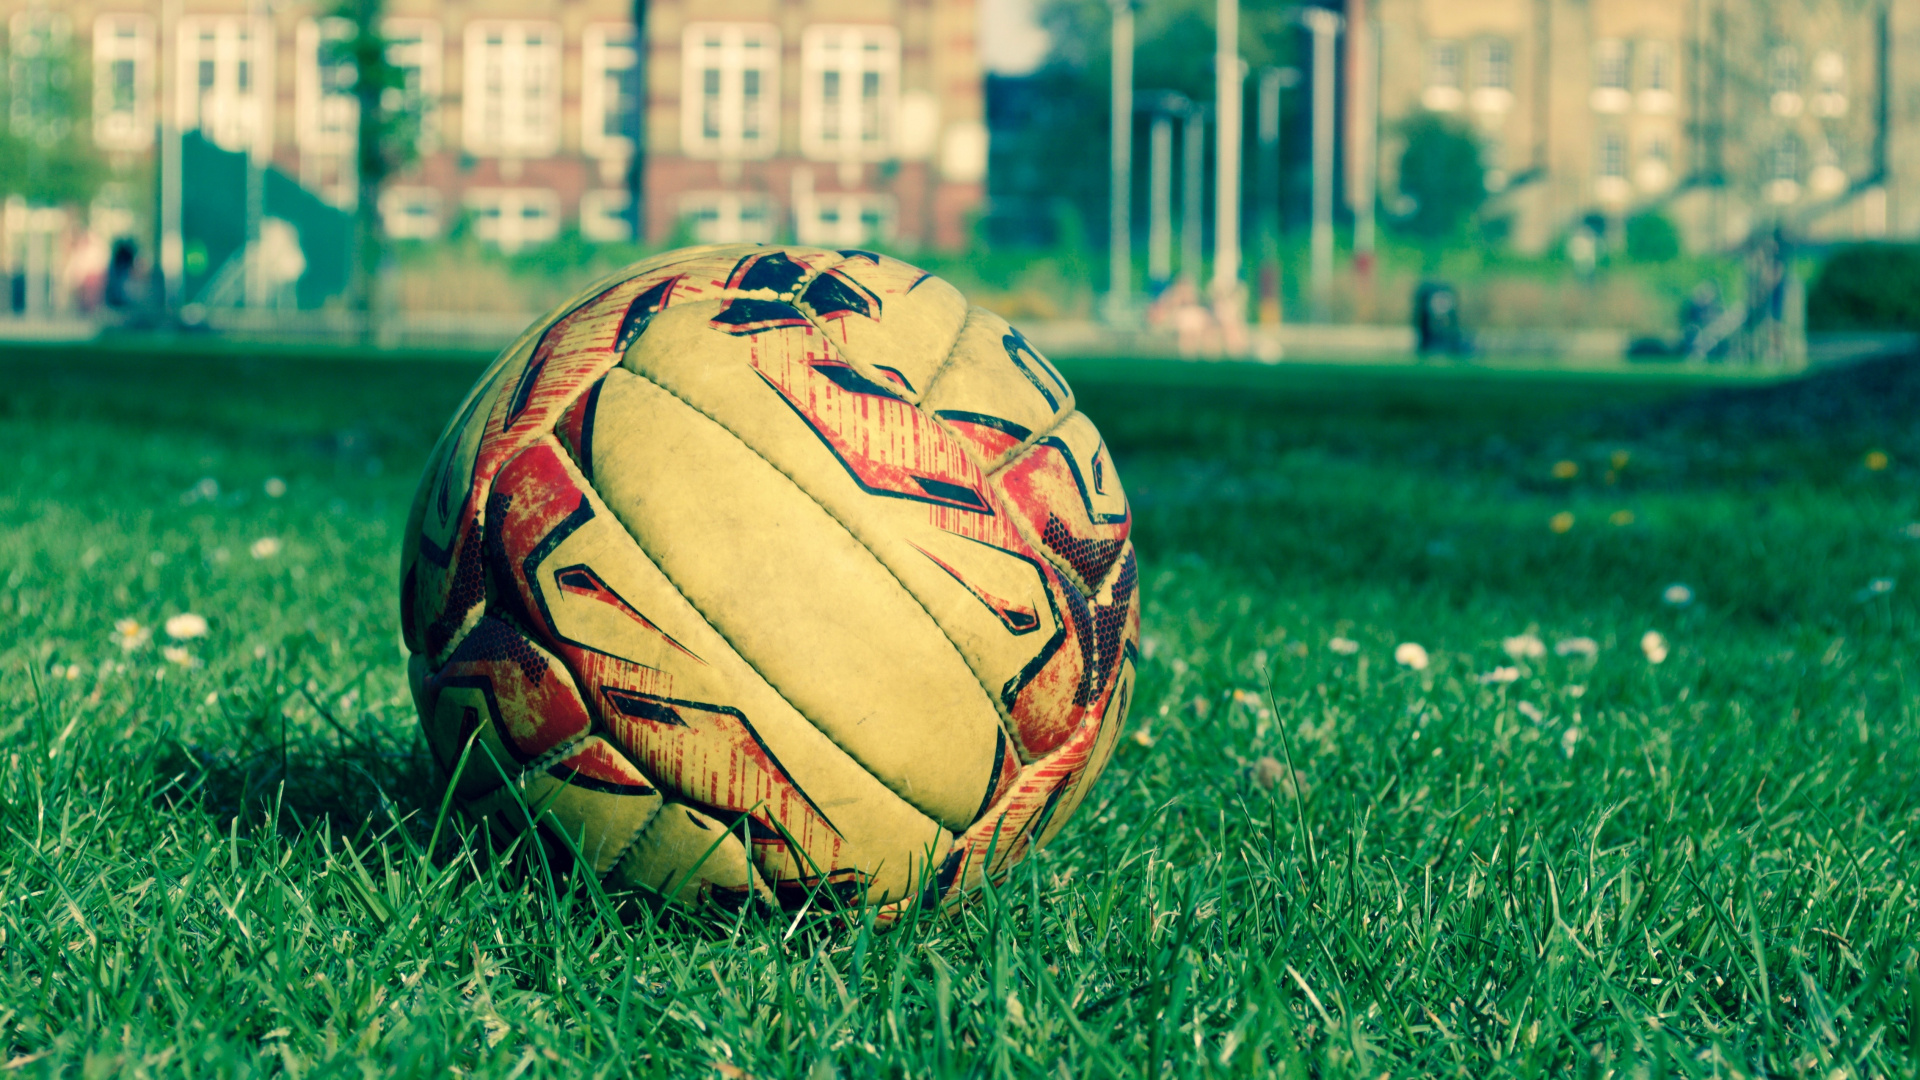 Brown and Black Soccer Ball on Green Grass Field During Daytime. Wallpaper in 1920x1080 Resolution